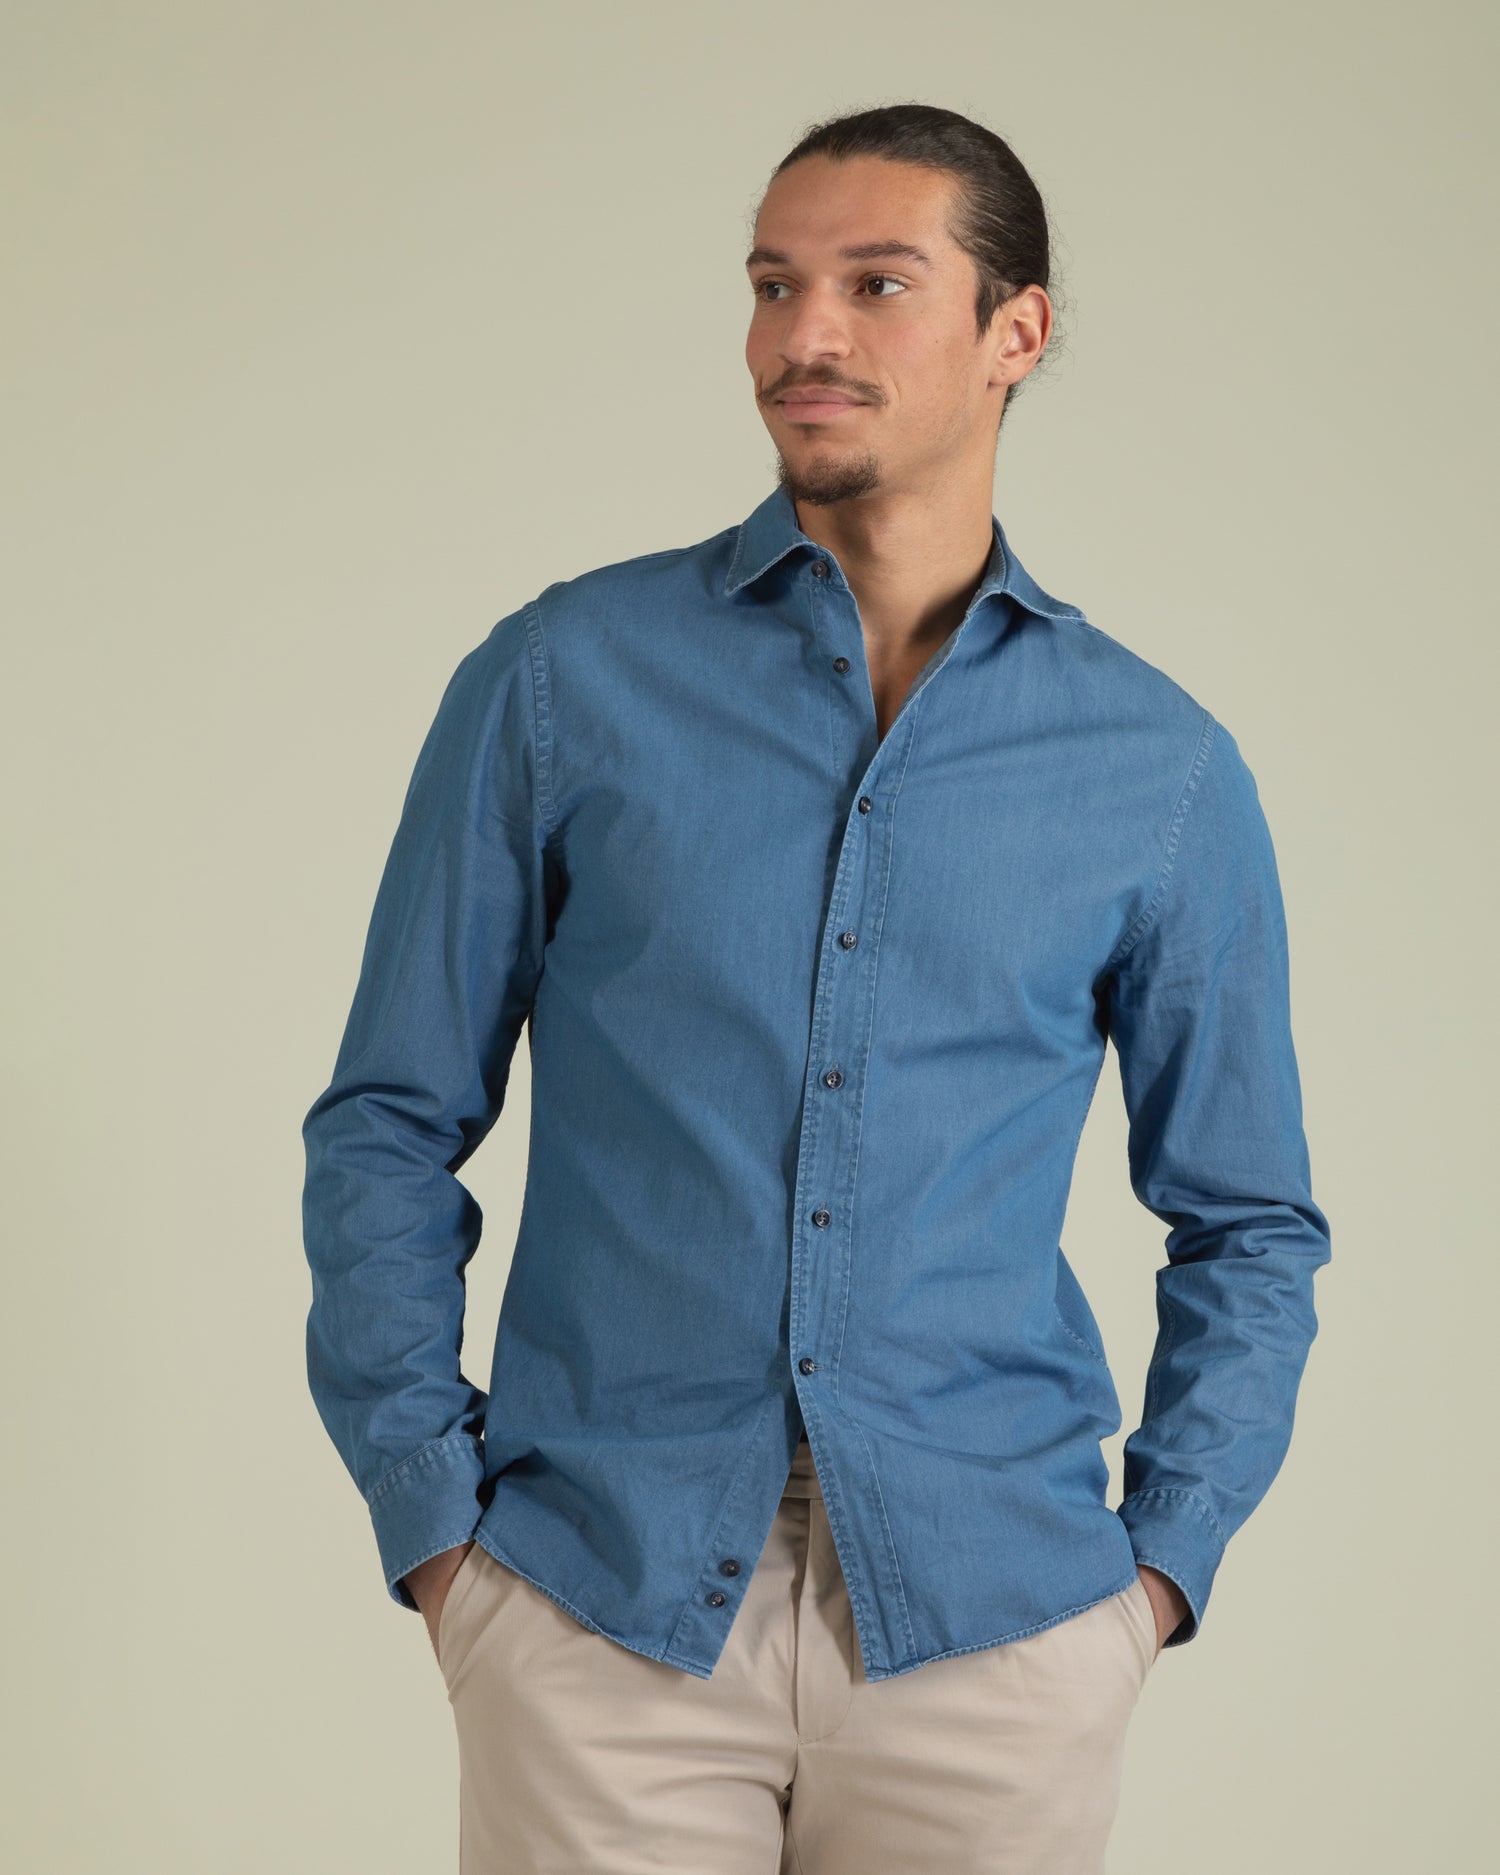 Blue Chambray Shirt in Slim fit (8458959126858)